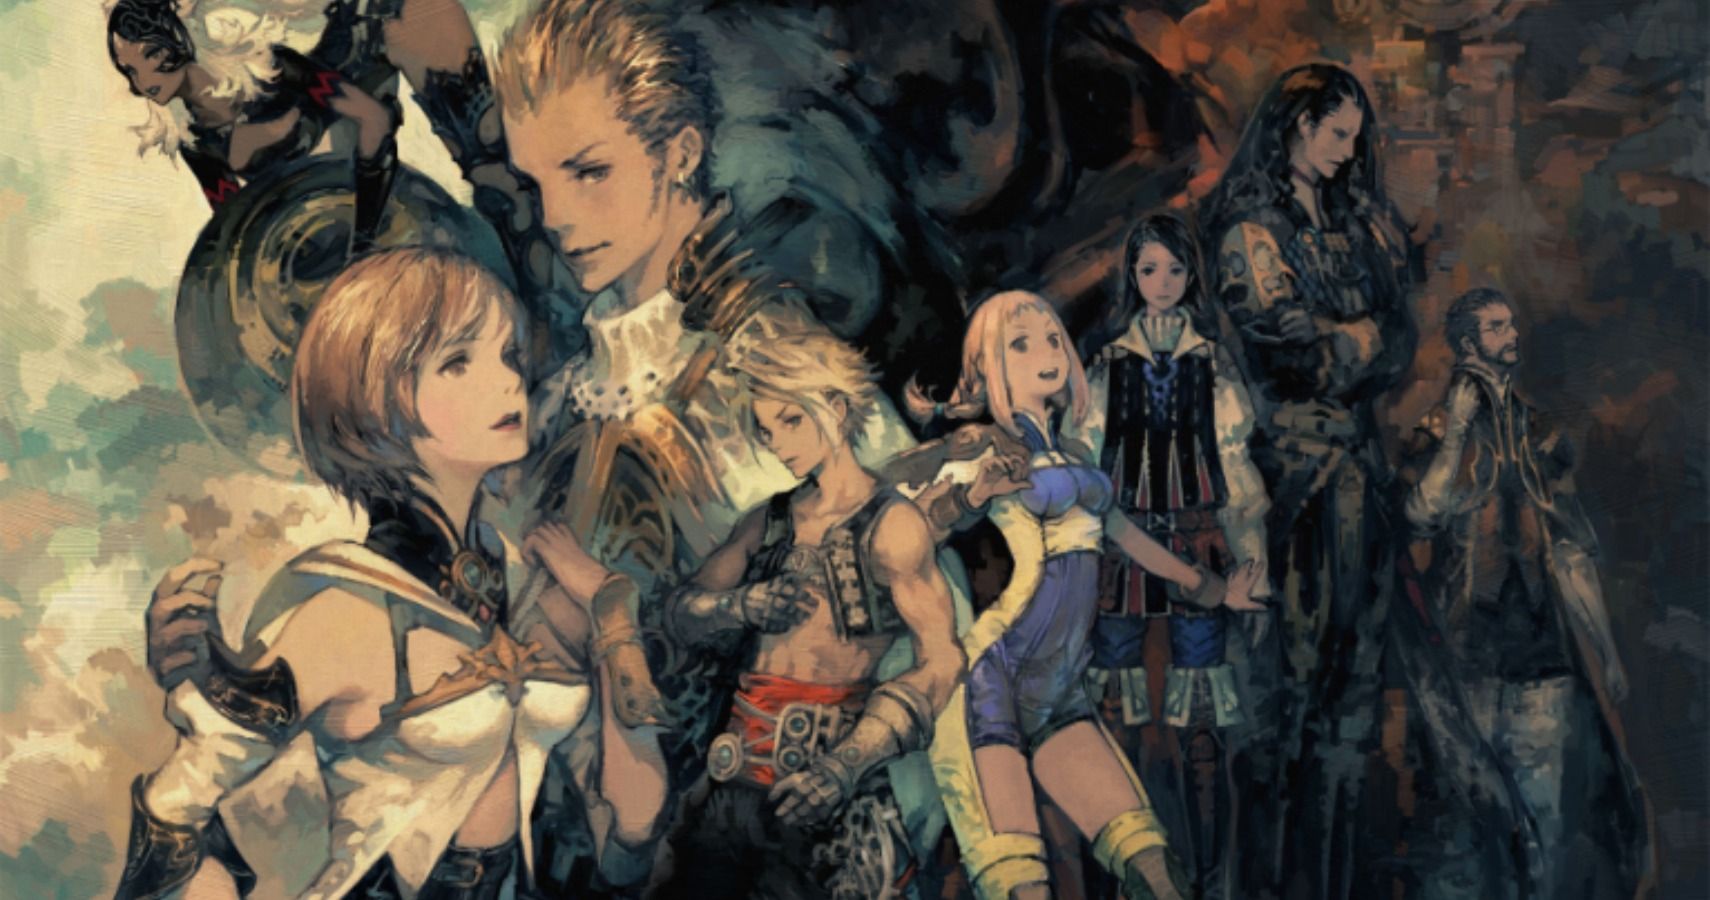 Final Fantasy XII The Zodiac Age Update For PC & PS4 Adds New Switch & Xbox Features